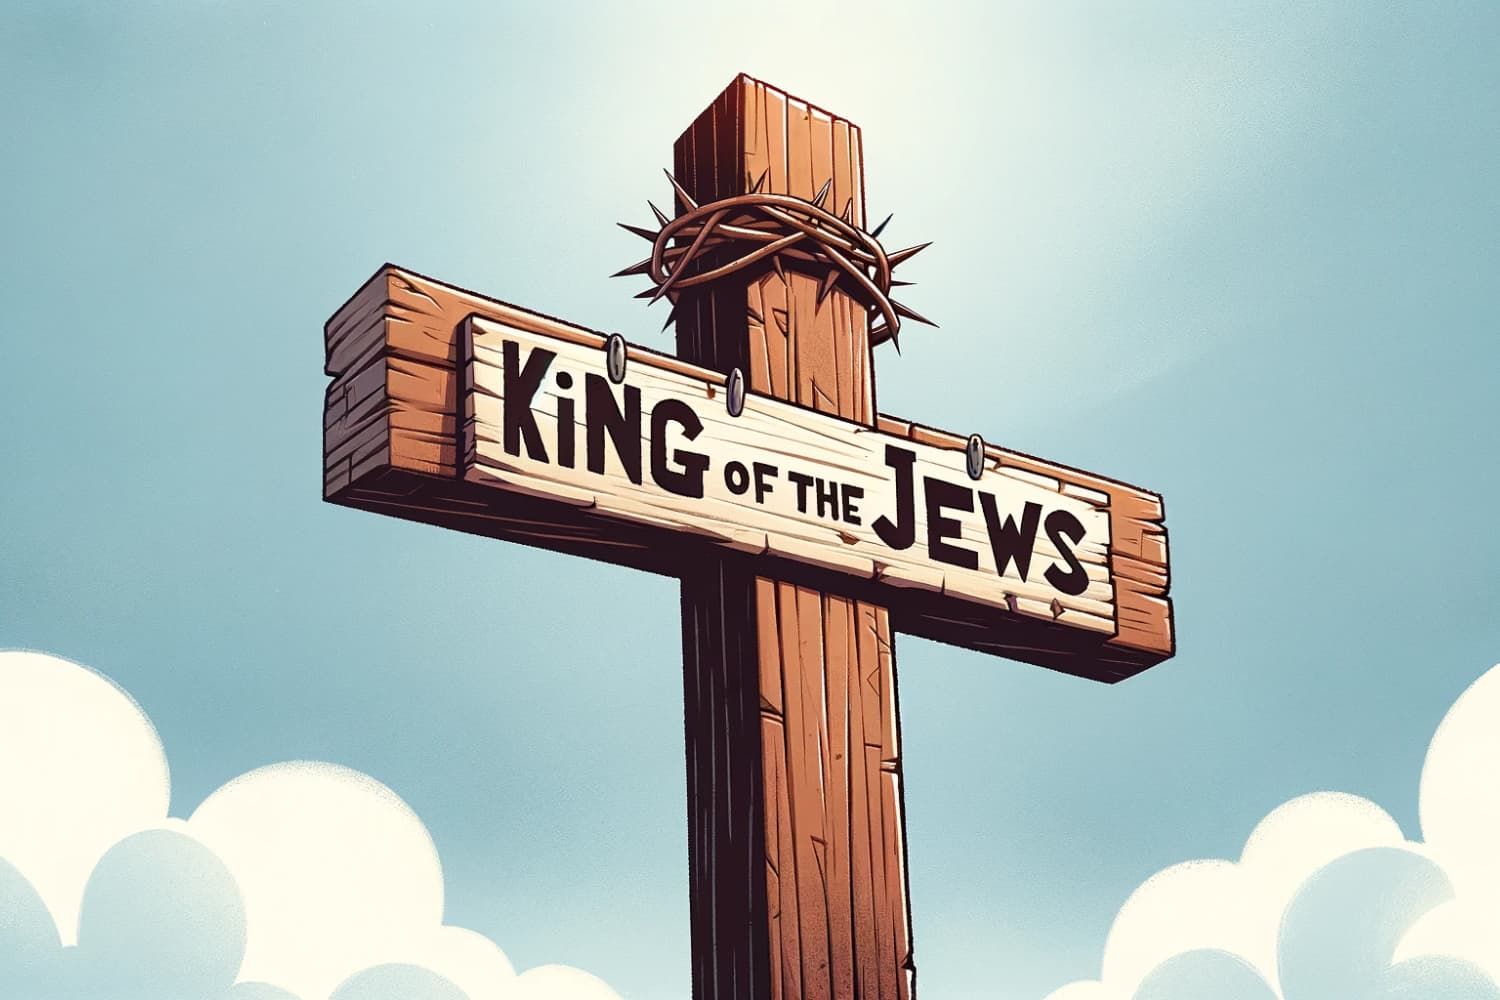 Lesson%20-%20NT%20Easter%2006%20-%20Jesus%20king%20of%20the%20Jews-1a7fec3c Jesus - His encounters